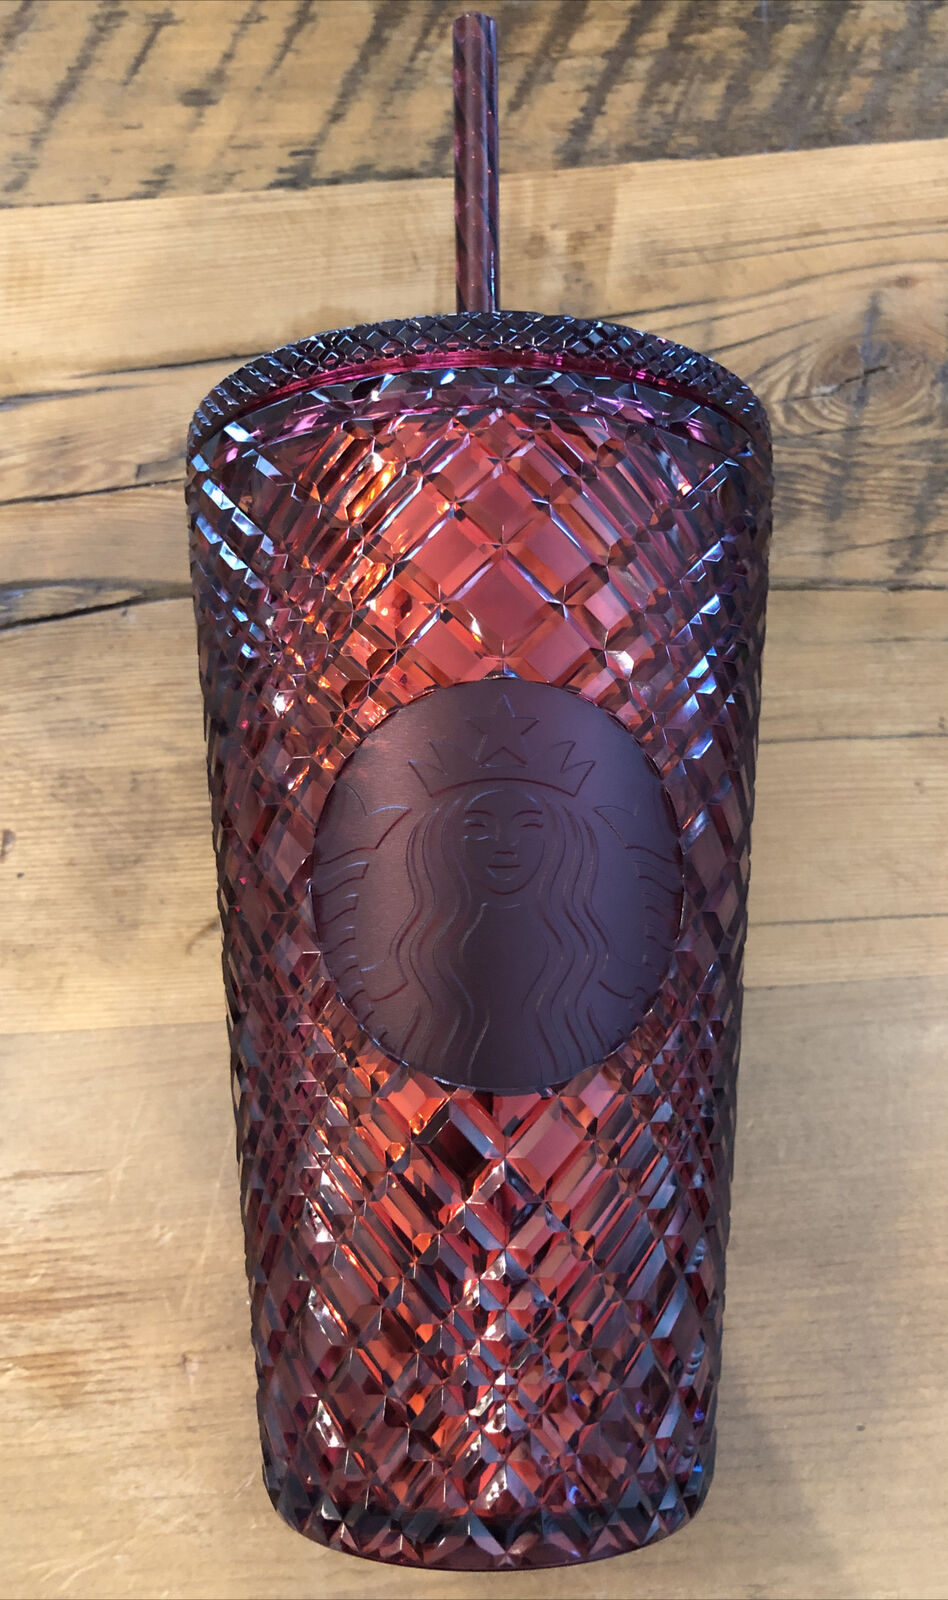 STARBUCKS Grande Iced (16oz) jeweled Ruby Red Tumbler Cold Cup new